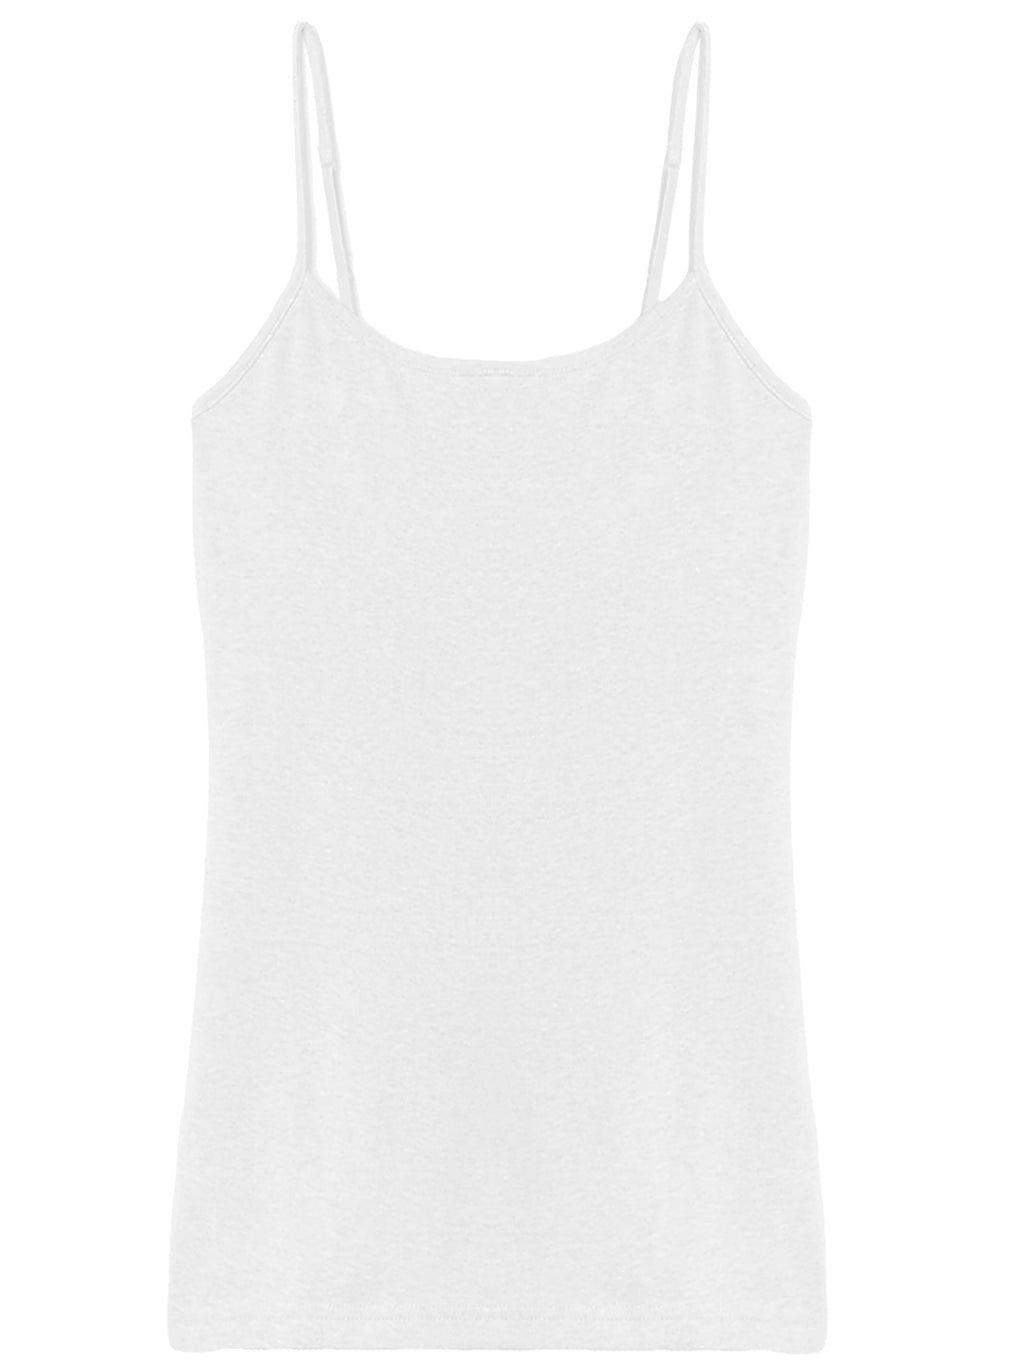 Camisole Top With Adjustable Straps